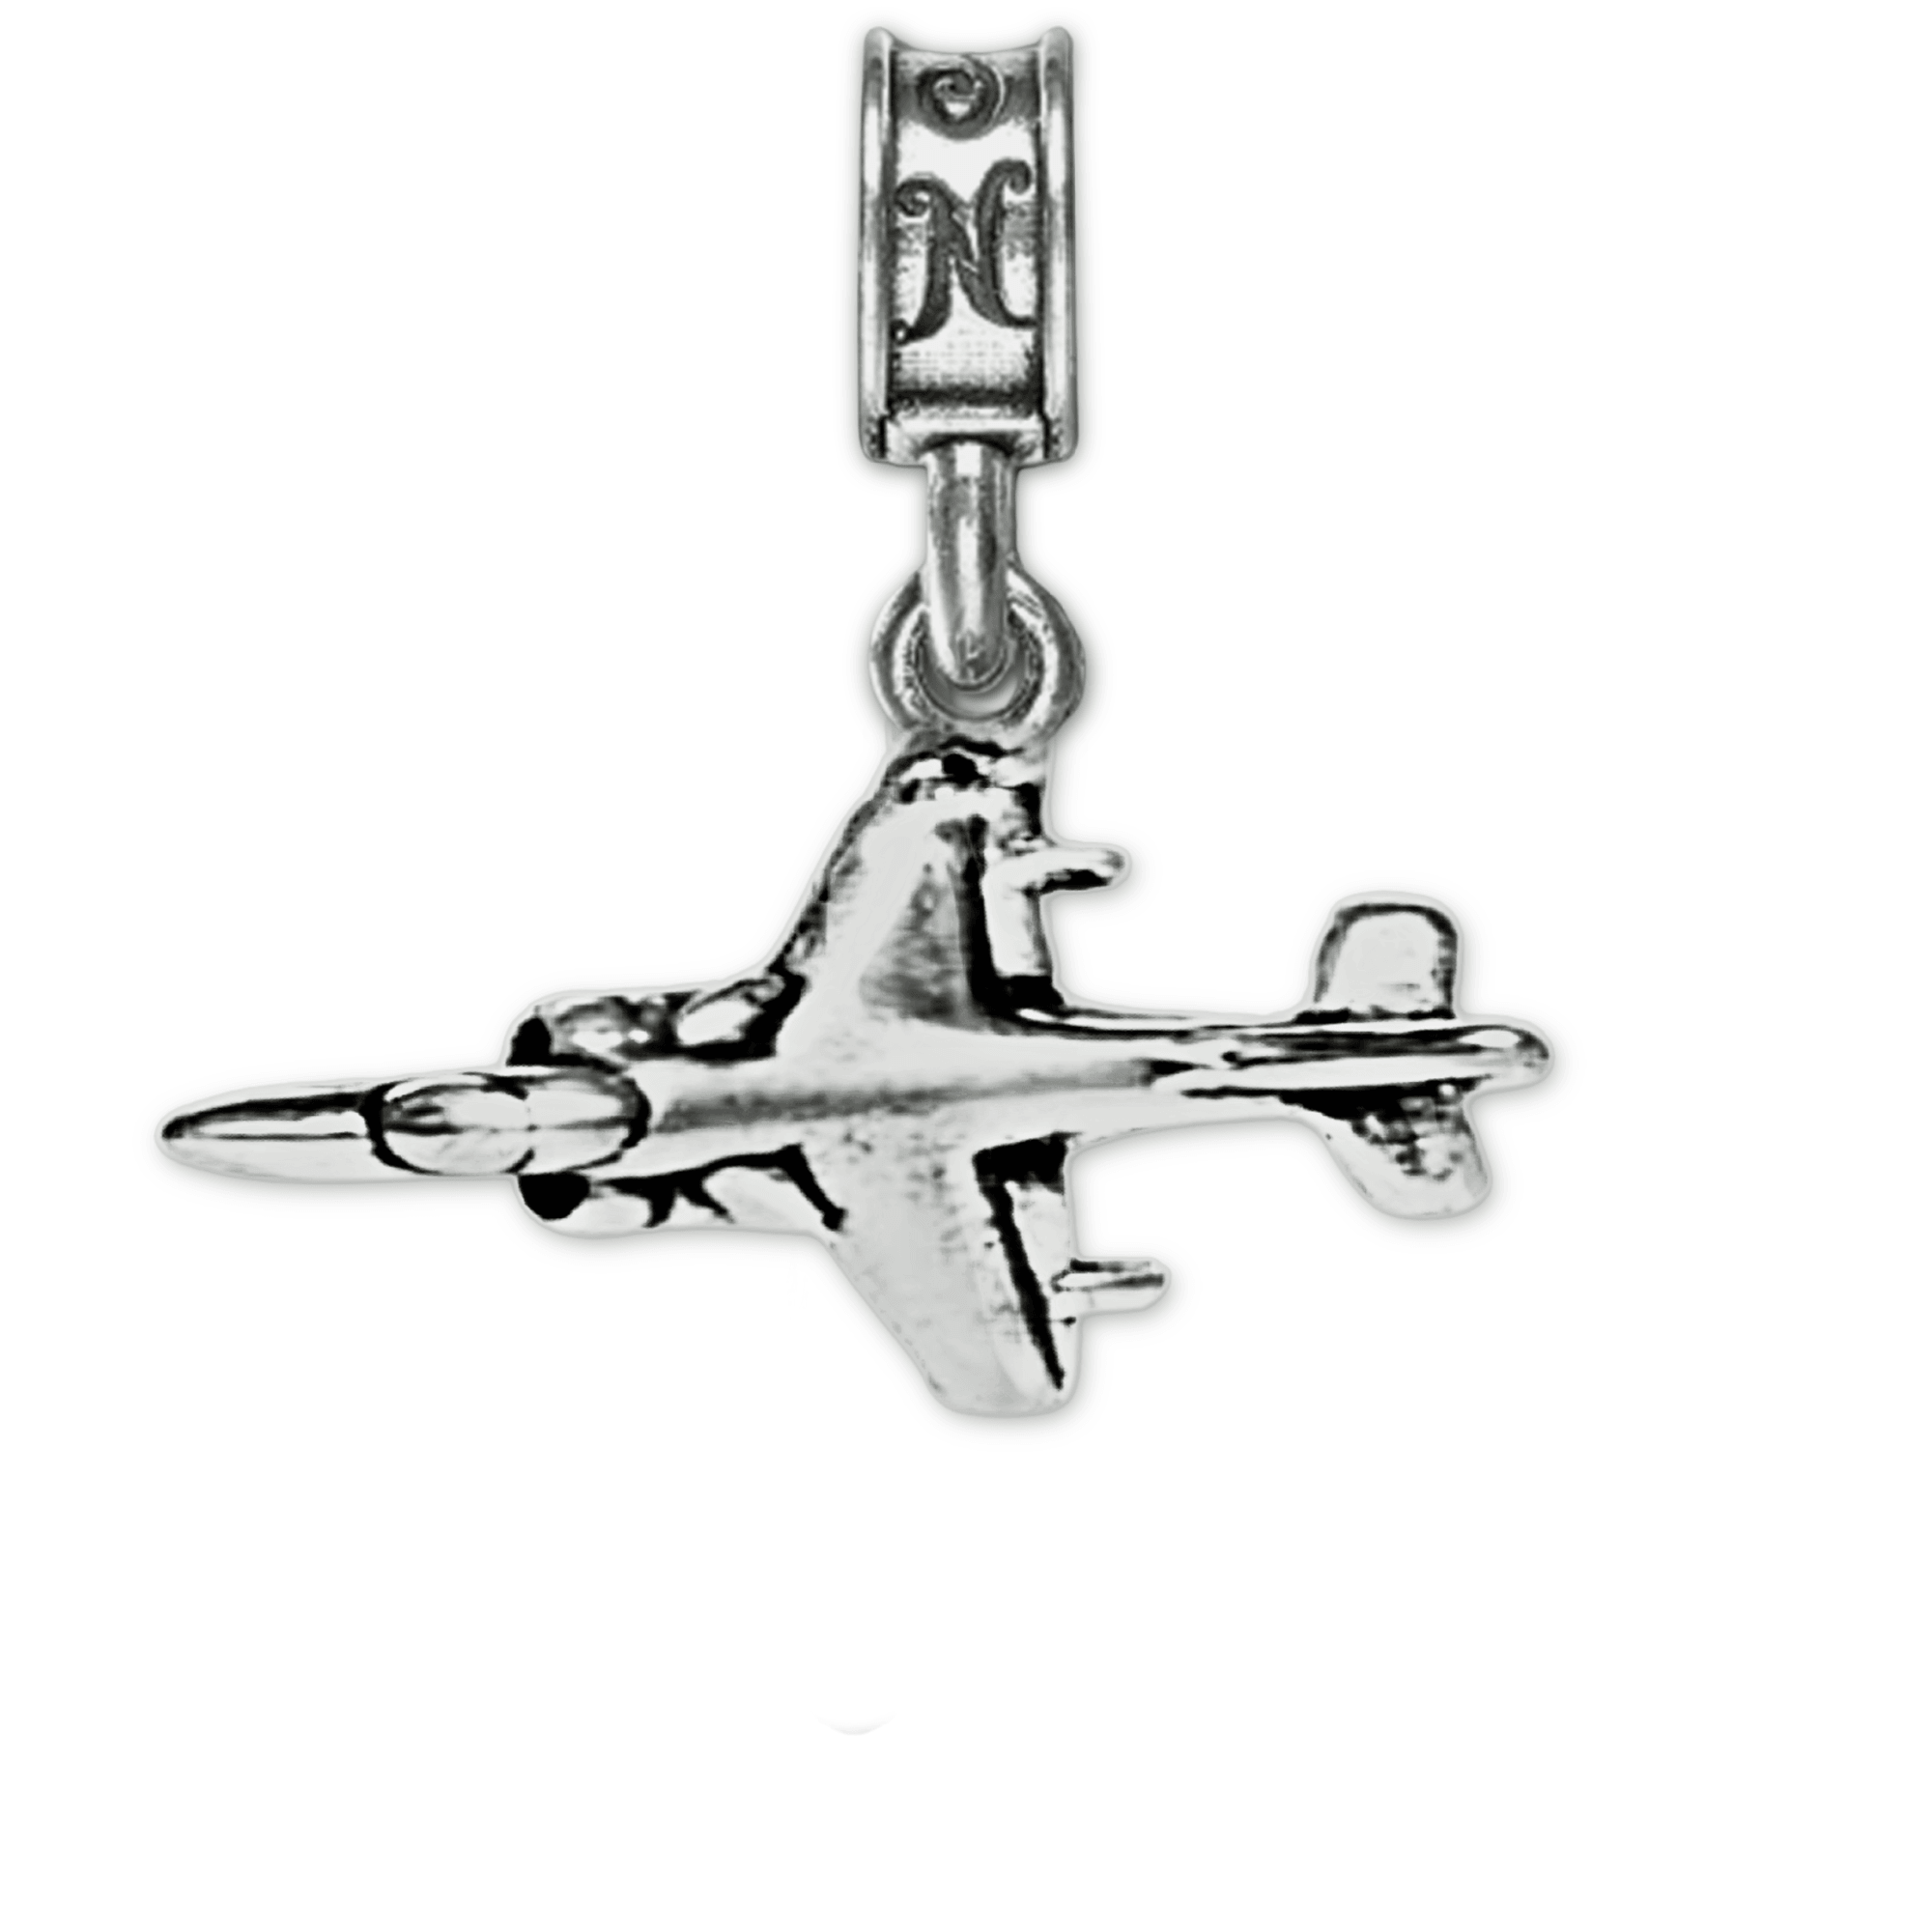 Military Jewelry, Military Charms, Military Gifts, Military Aviation, Harrier Charm